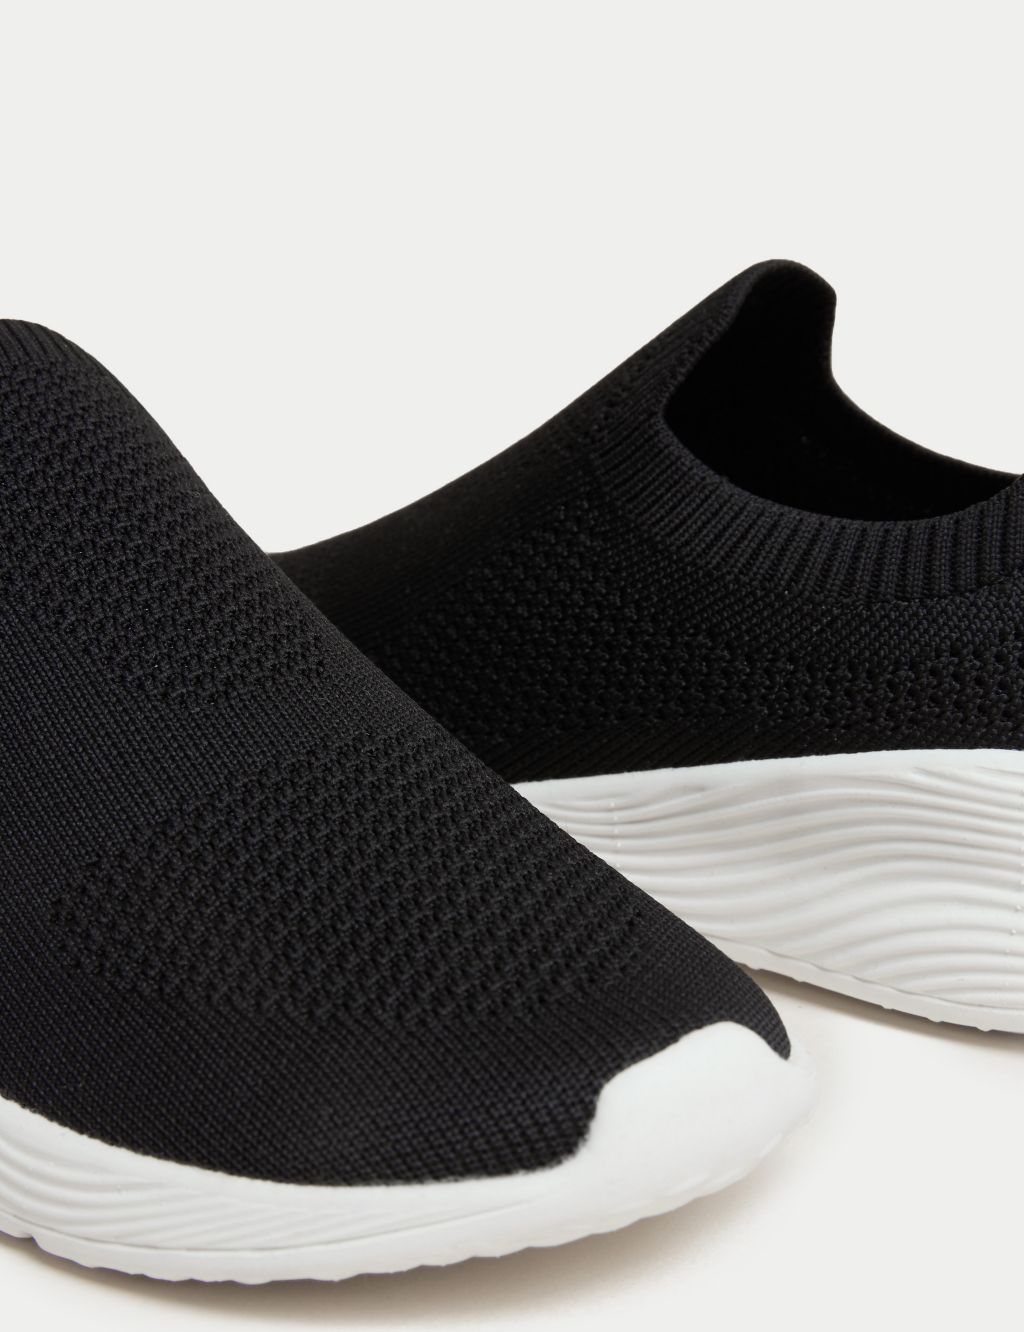 Knitted Slip On Trainers image 3